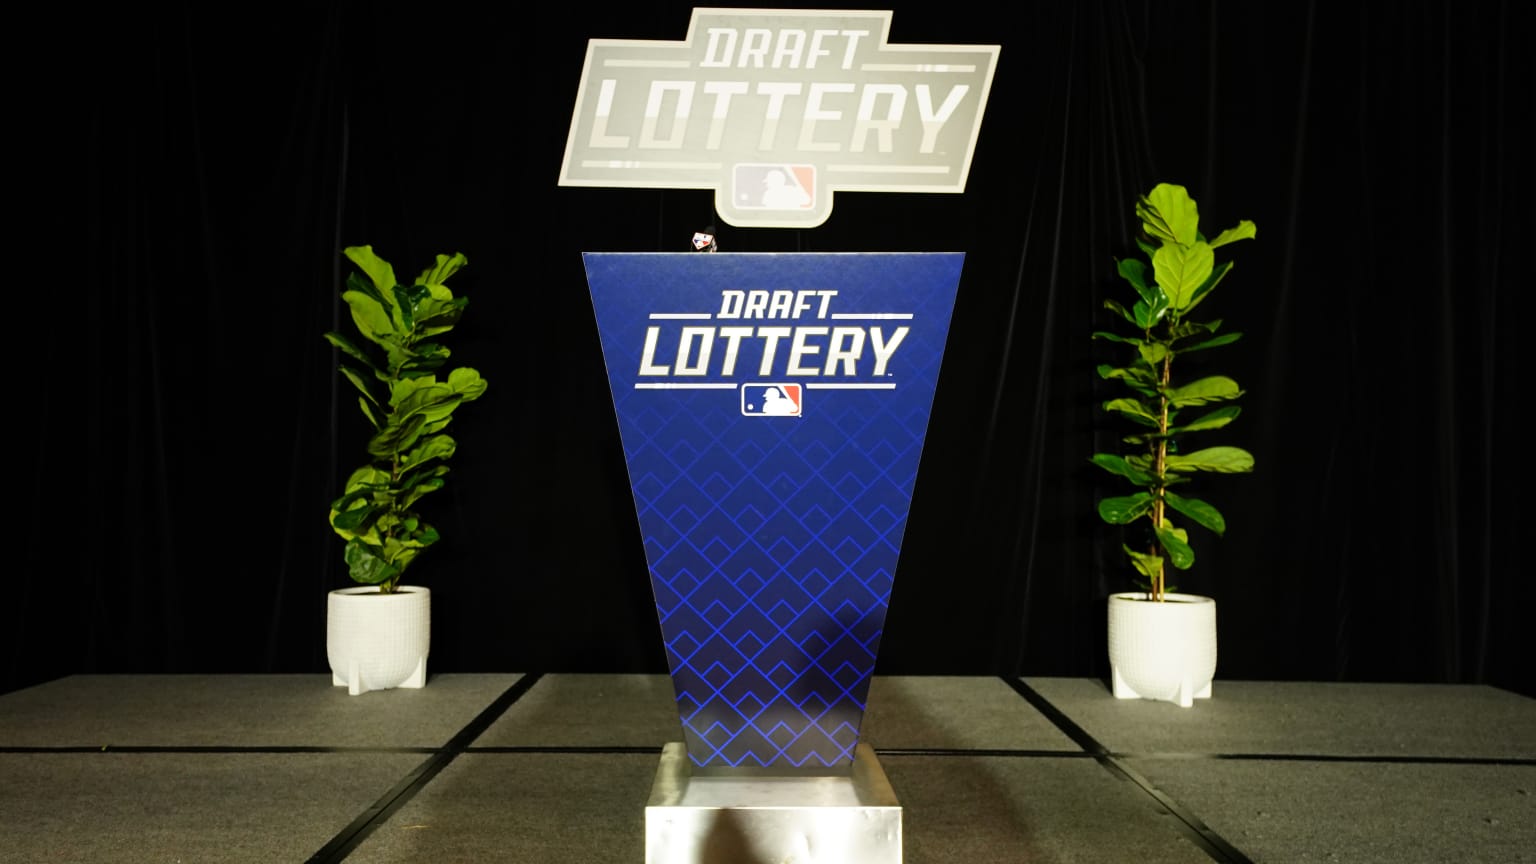 A podium with the Draft Lottery logo